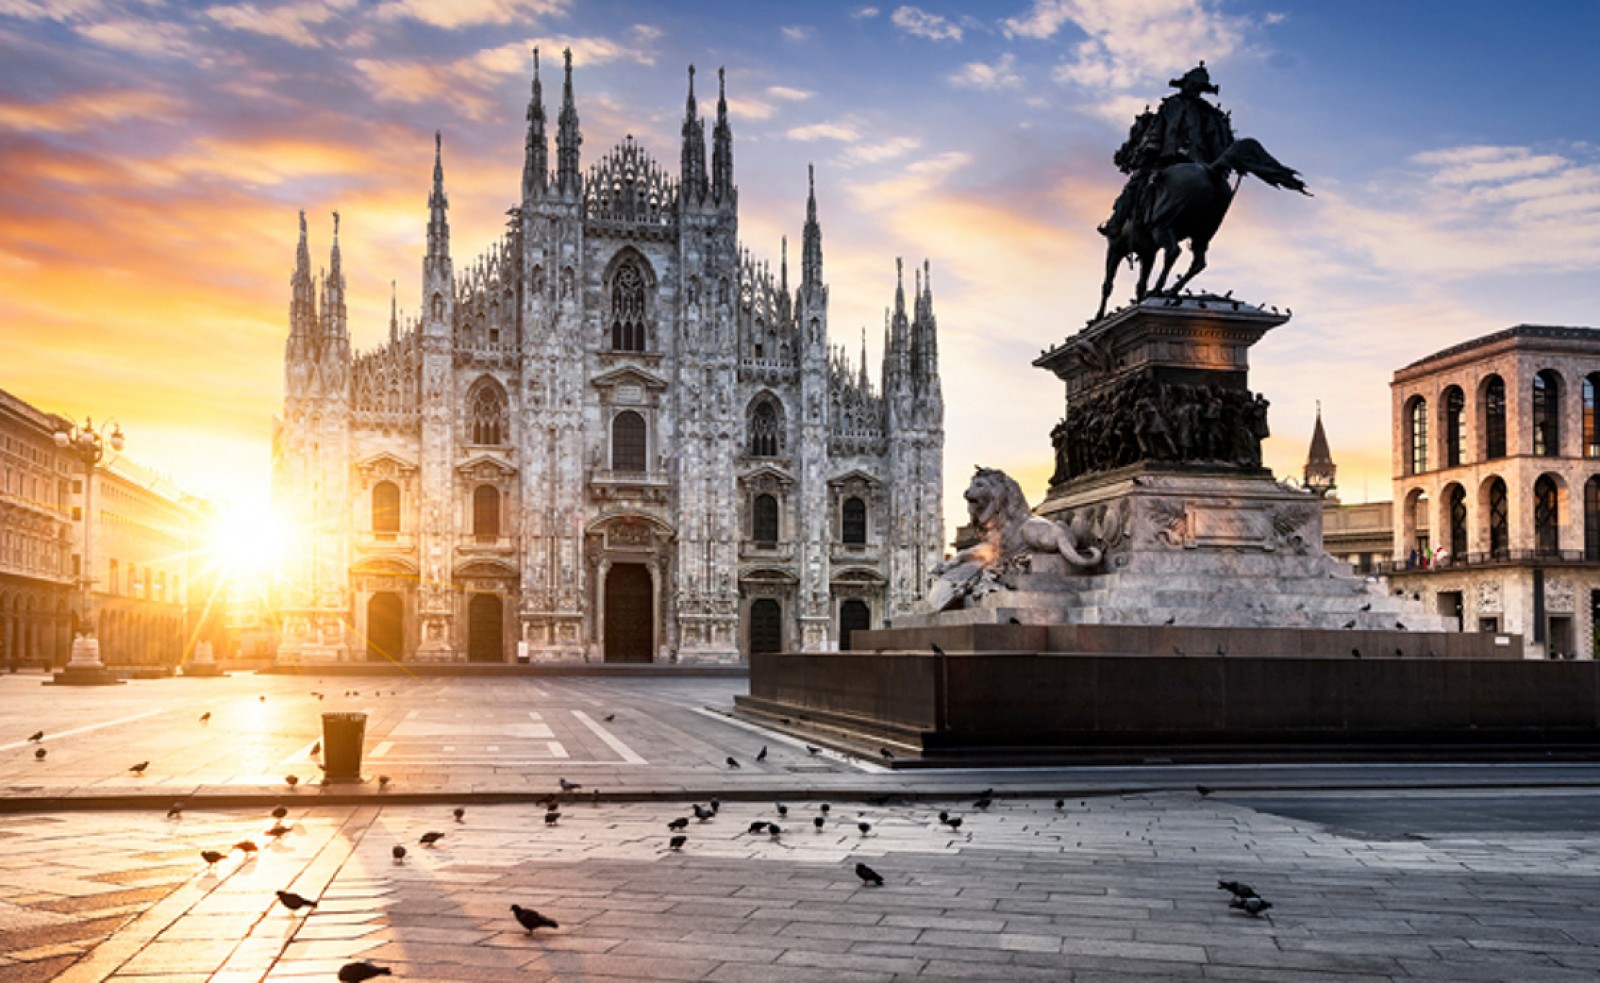 Transfer Milan Airport - Book your transfer 24/7 - Ruby Services - Book Your Transfer From Milan Airport With Private Chauffeur. Airport 